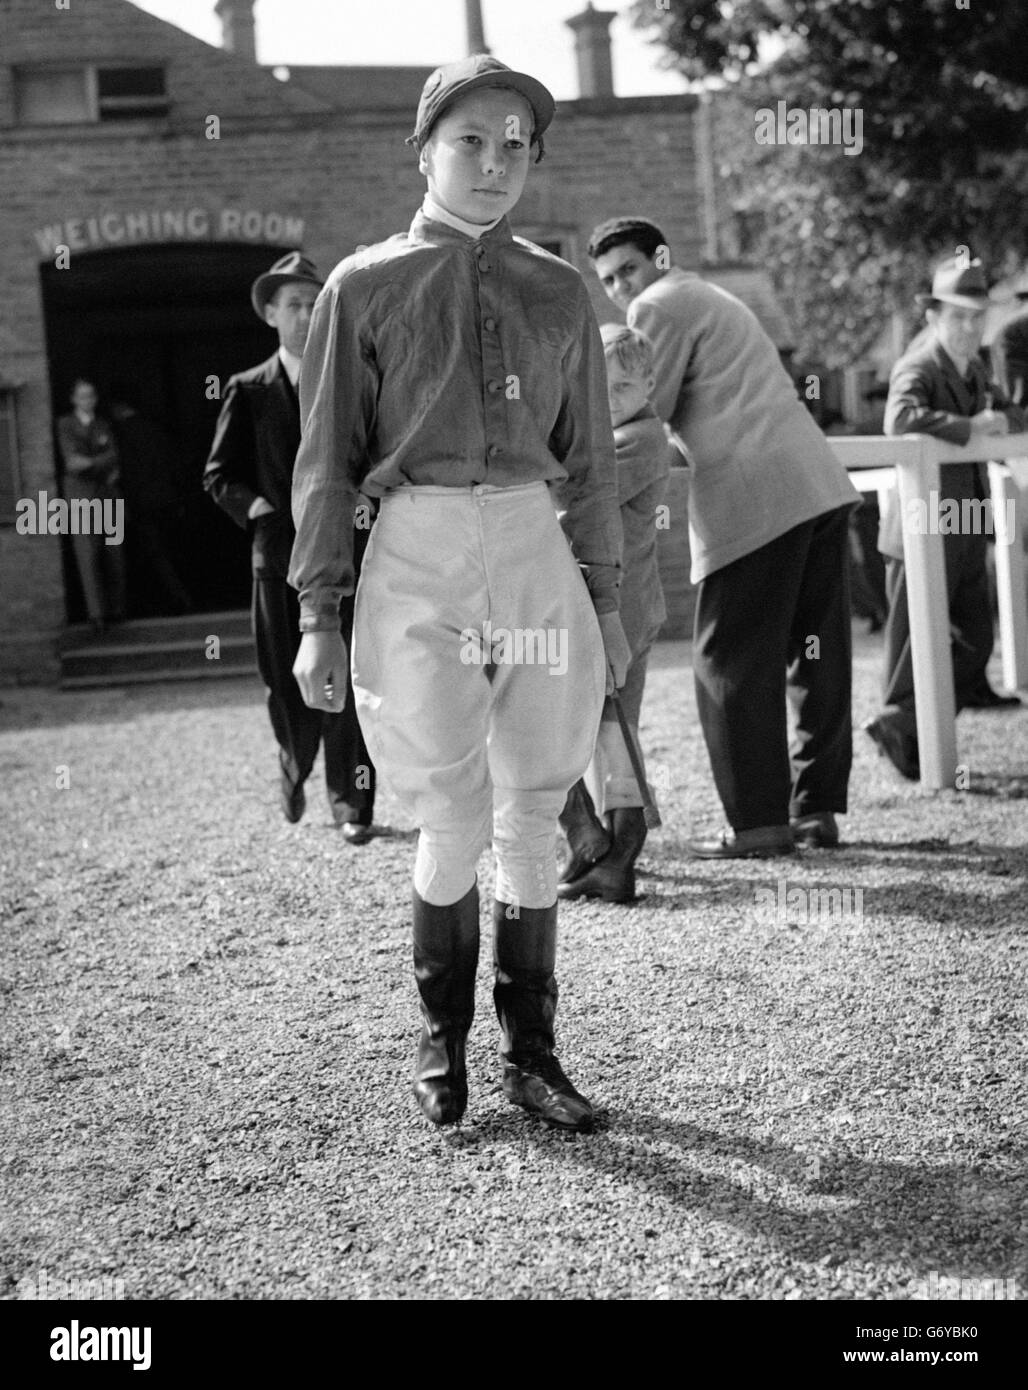 14 year-old Lester Piggott who recently rode Blue Sapphire to victory in the Kent Handicap at Folkstone. He beat famed jockey Gordon Richards, who came third. Stock Photo